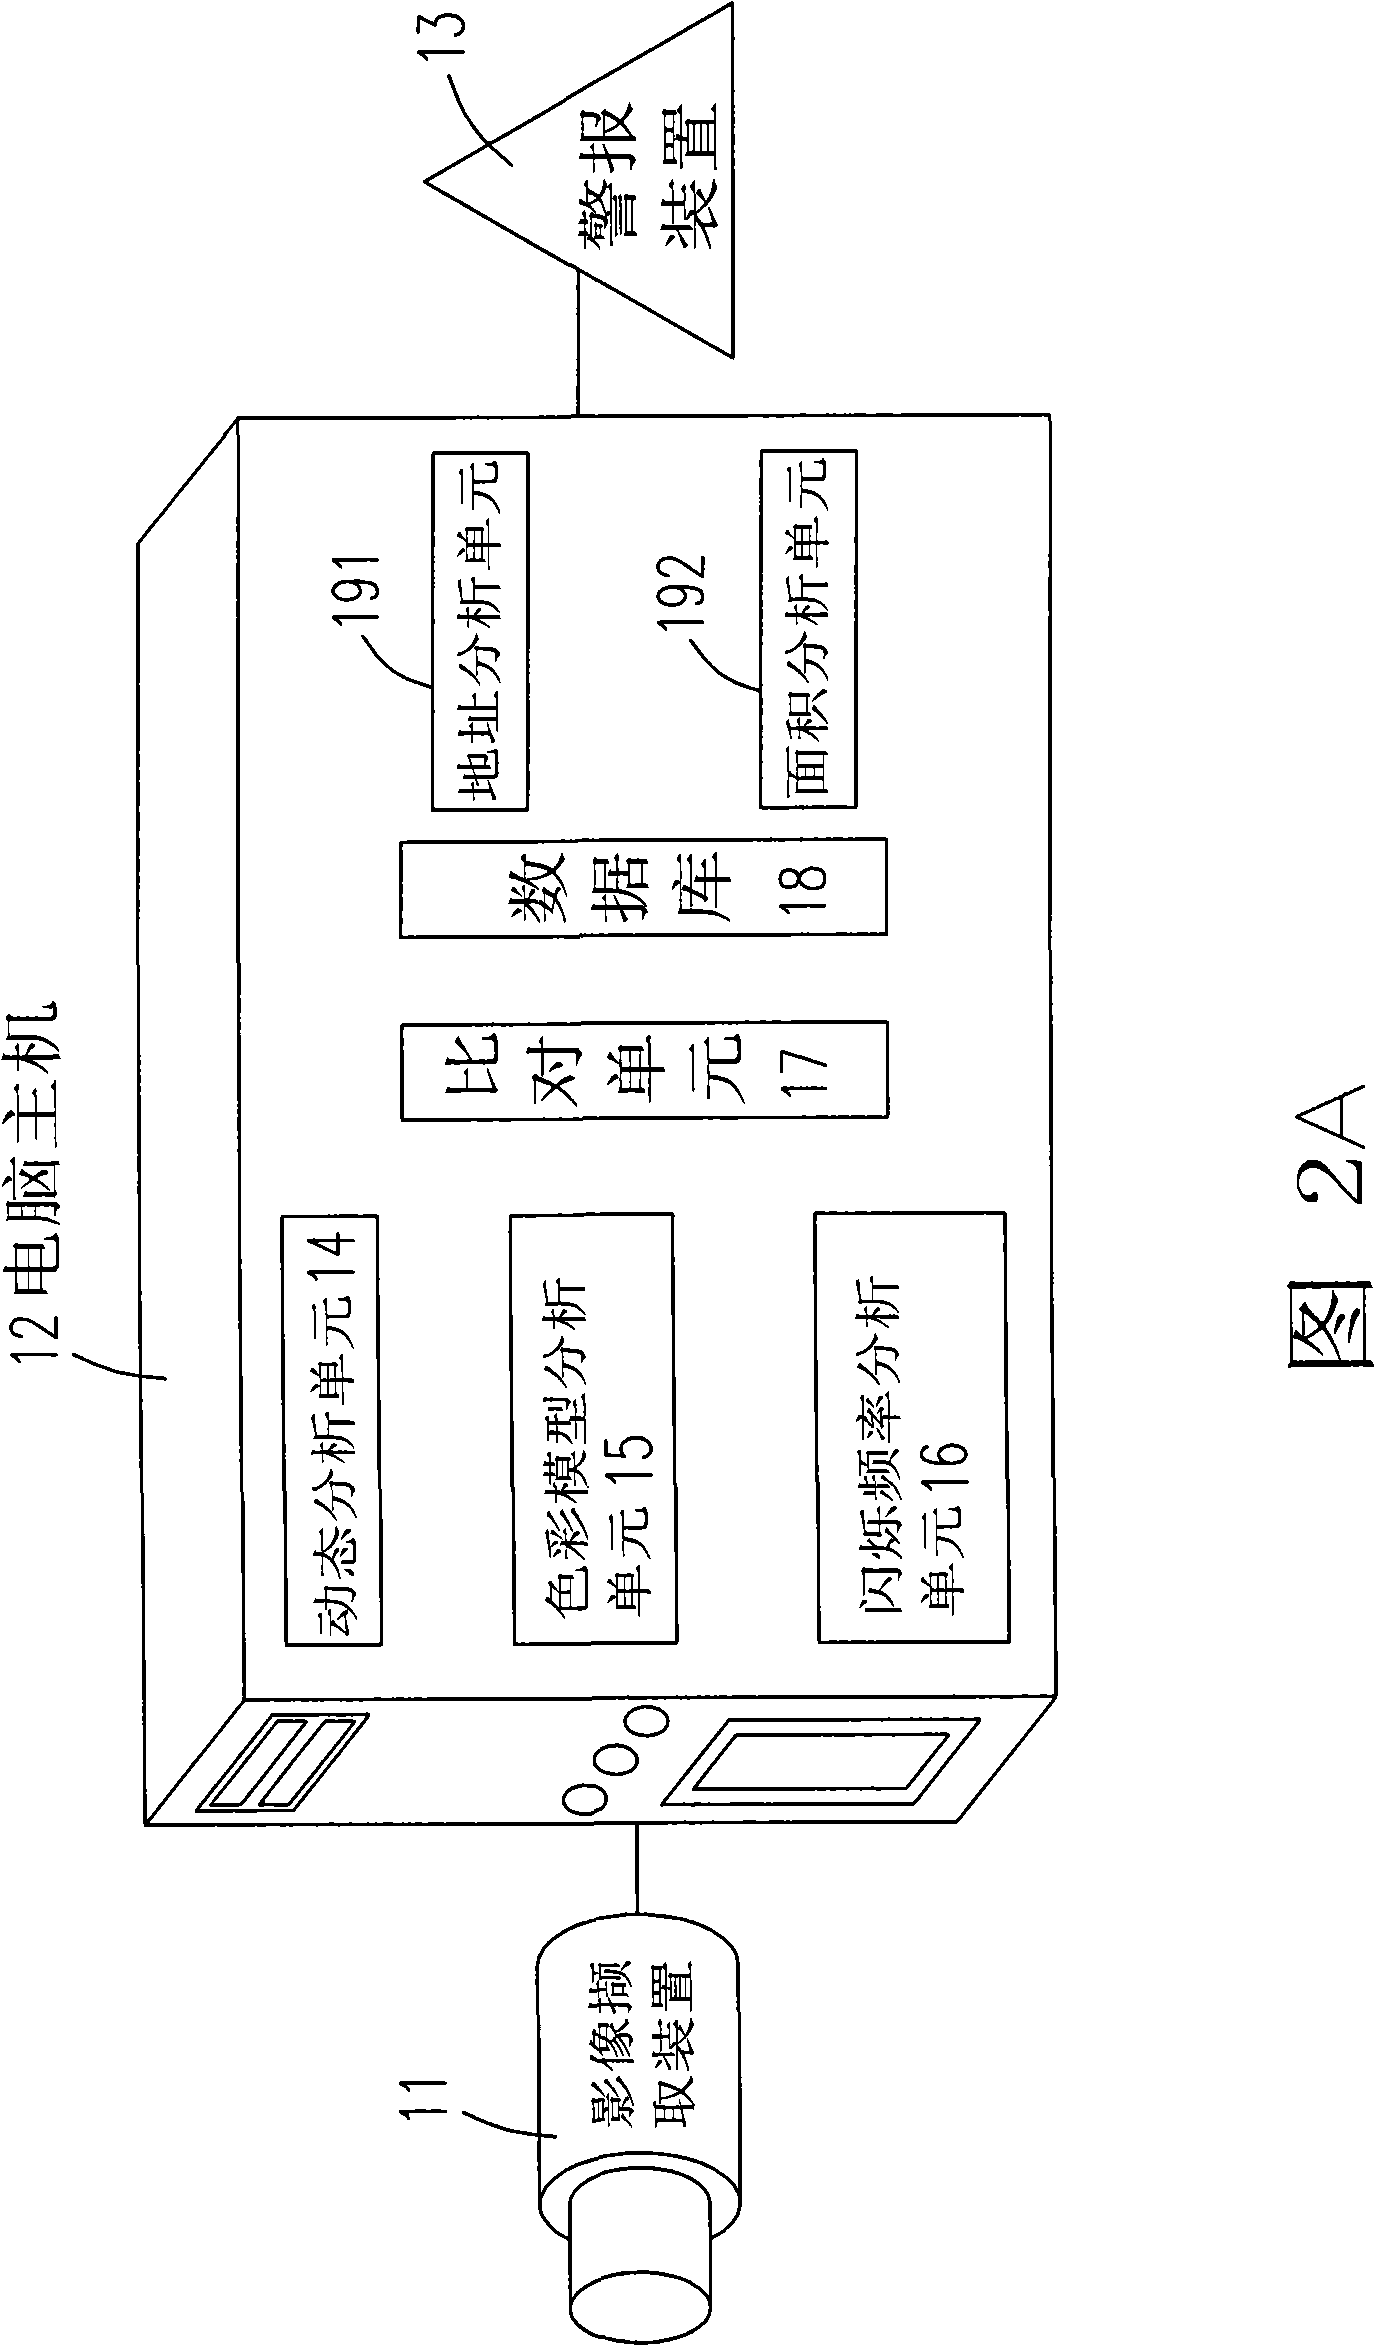 Flame detecting method and device